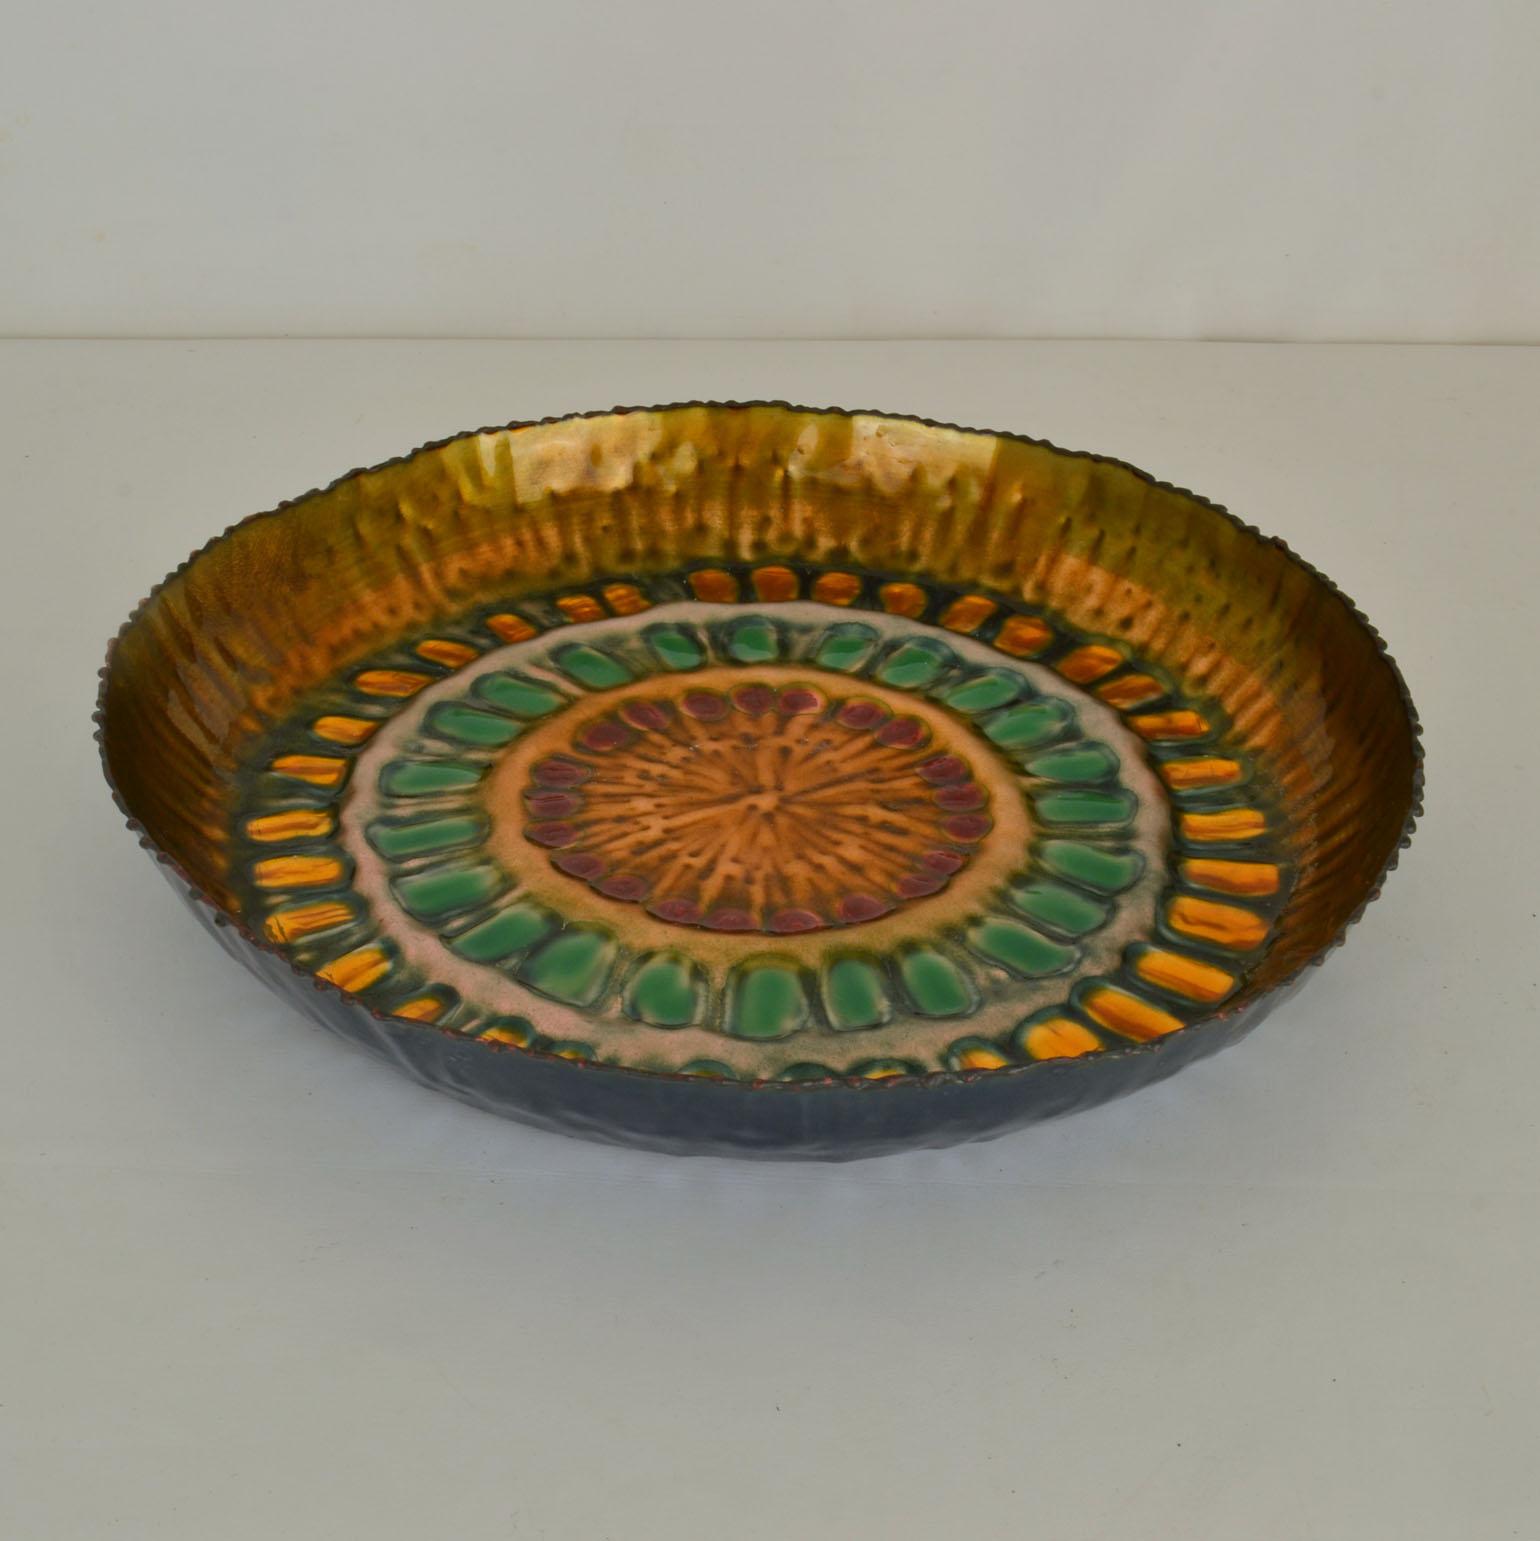 Enamelling is one of the oldest and most precious of crafts and the decorative round bowl with its sun ray of transparent brilliant bright gold and green. The jewel-like surface is a modern take on an old tradition. The turned rim as an irregular